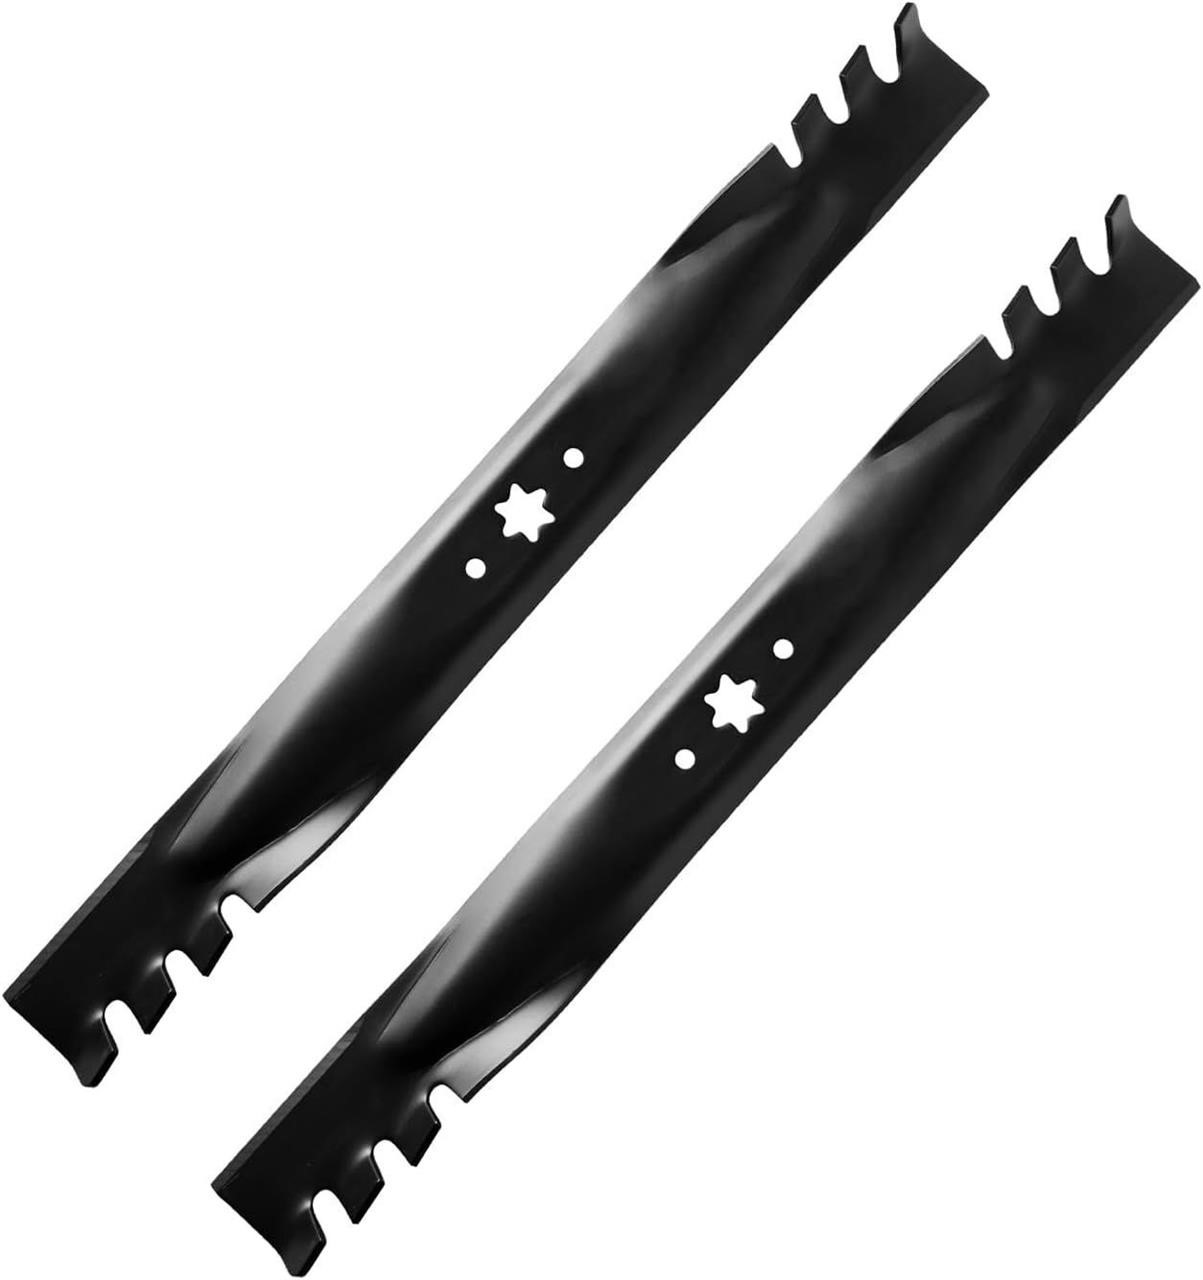 Replacement Lawn Mower Mulching Blades